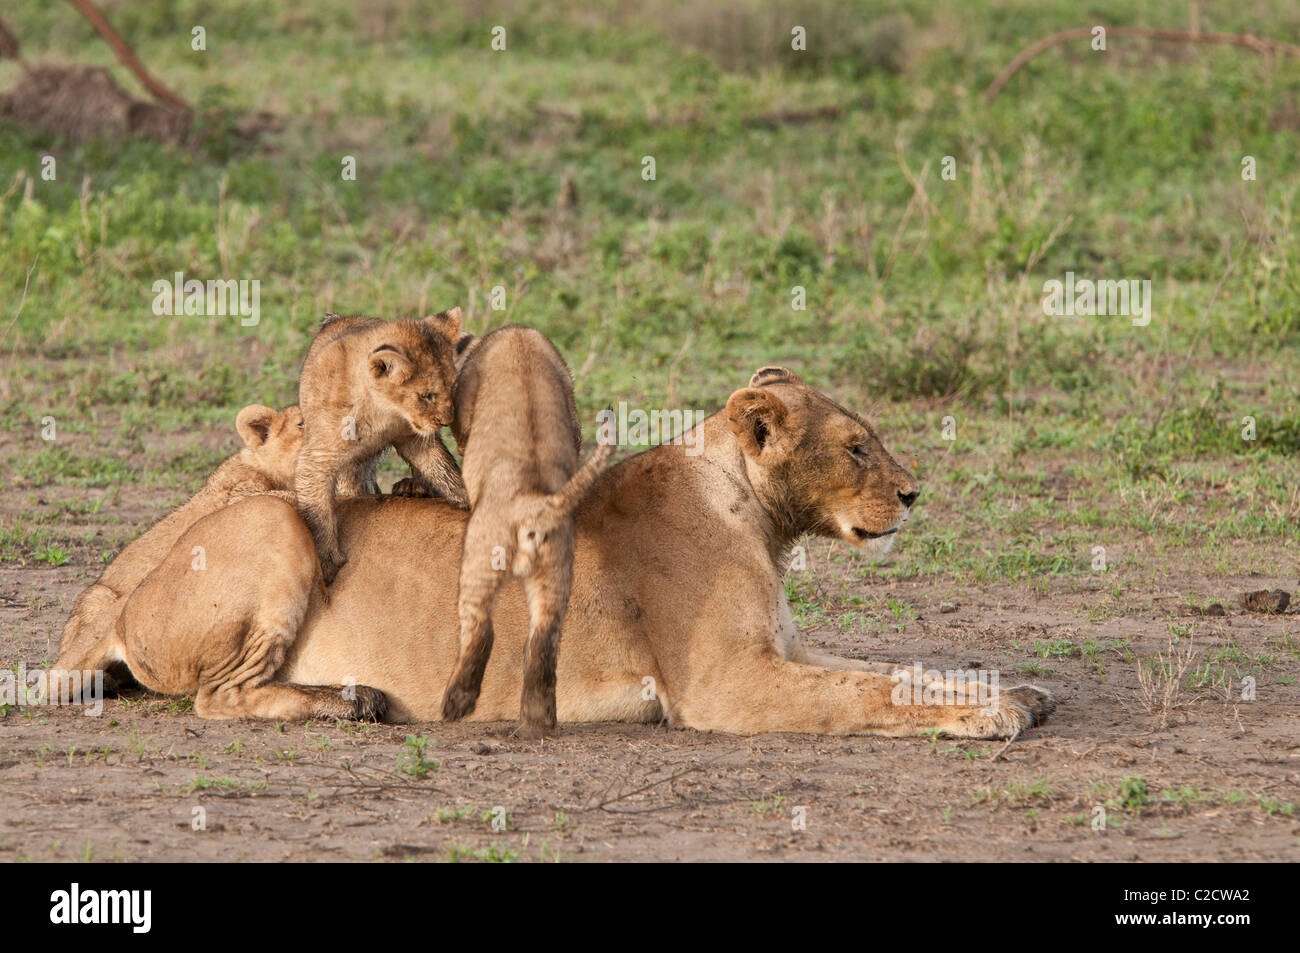 Stock photo of three lion cubs playing on top of their mom. Stock Photo